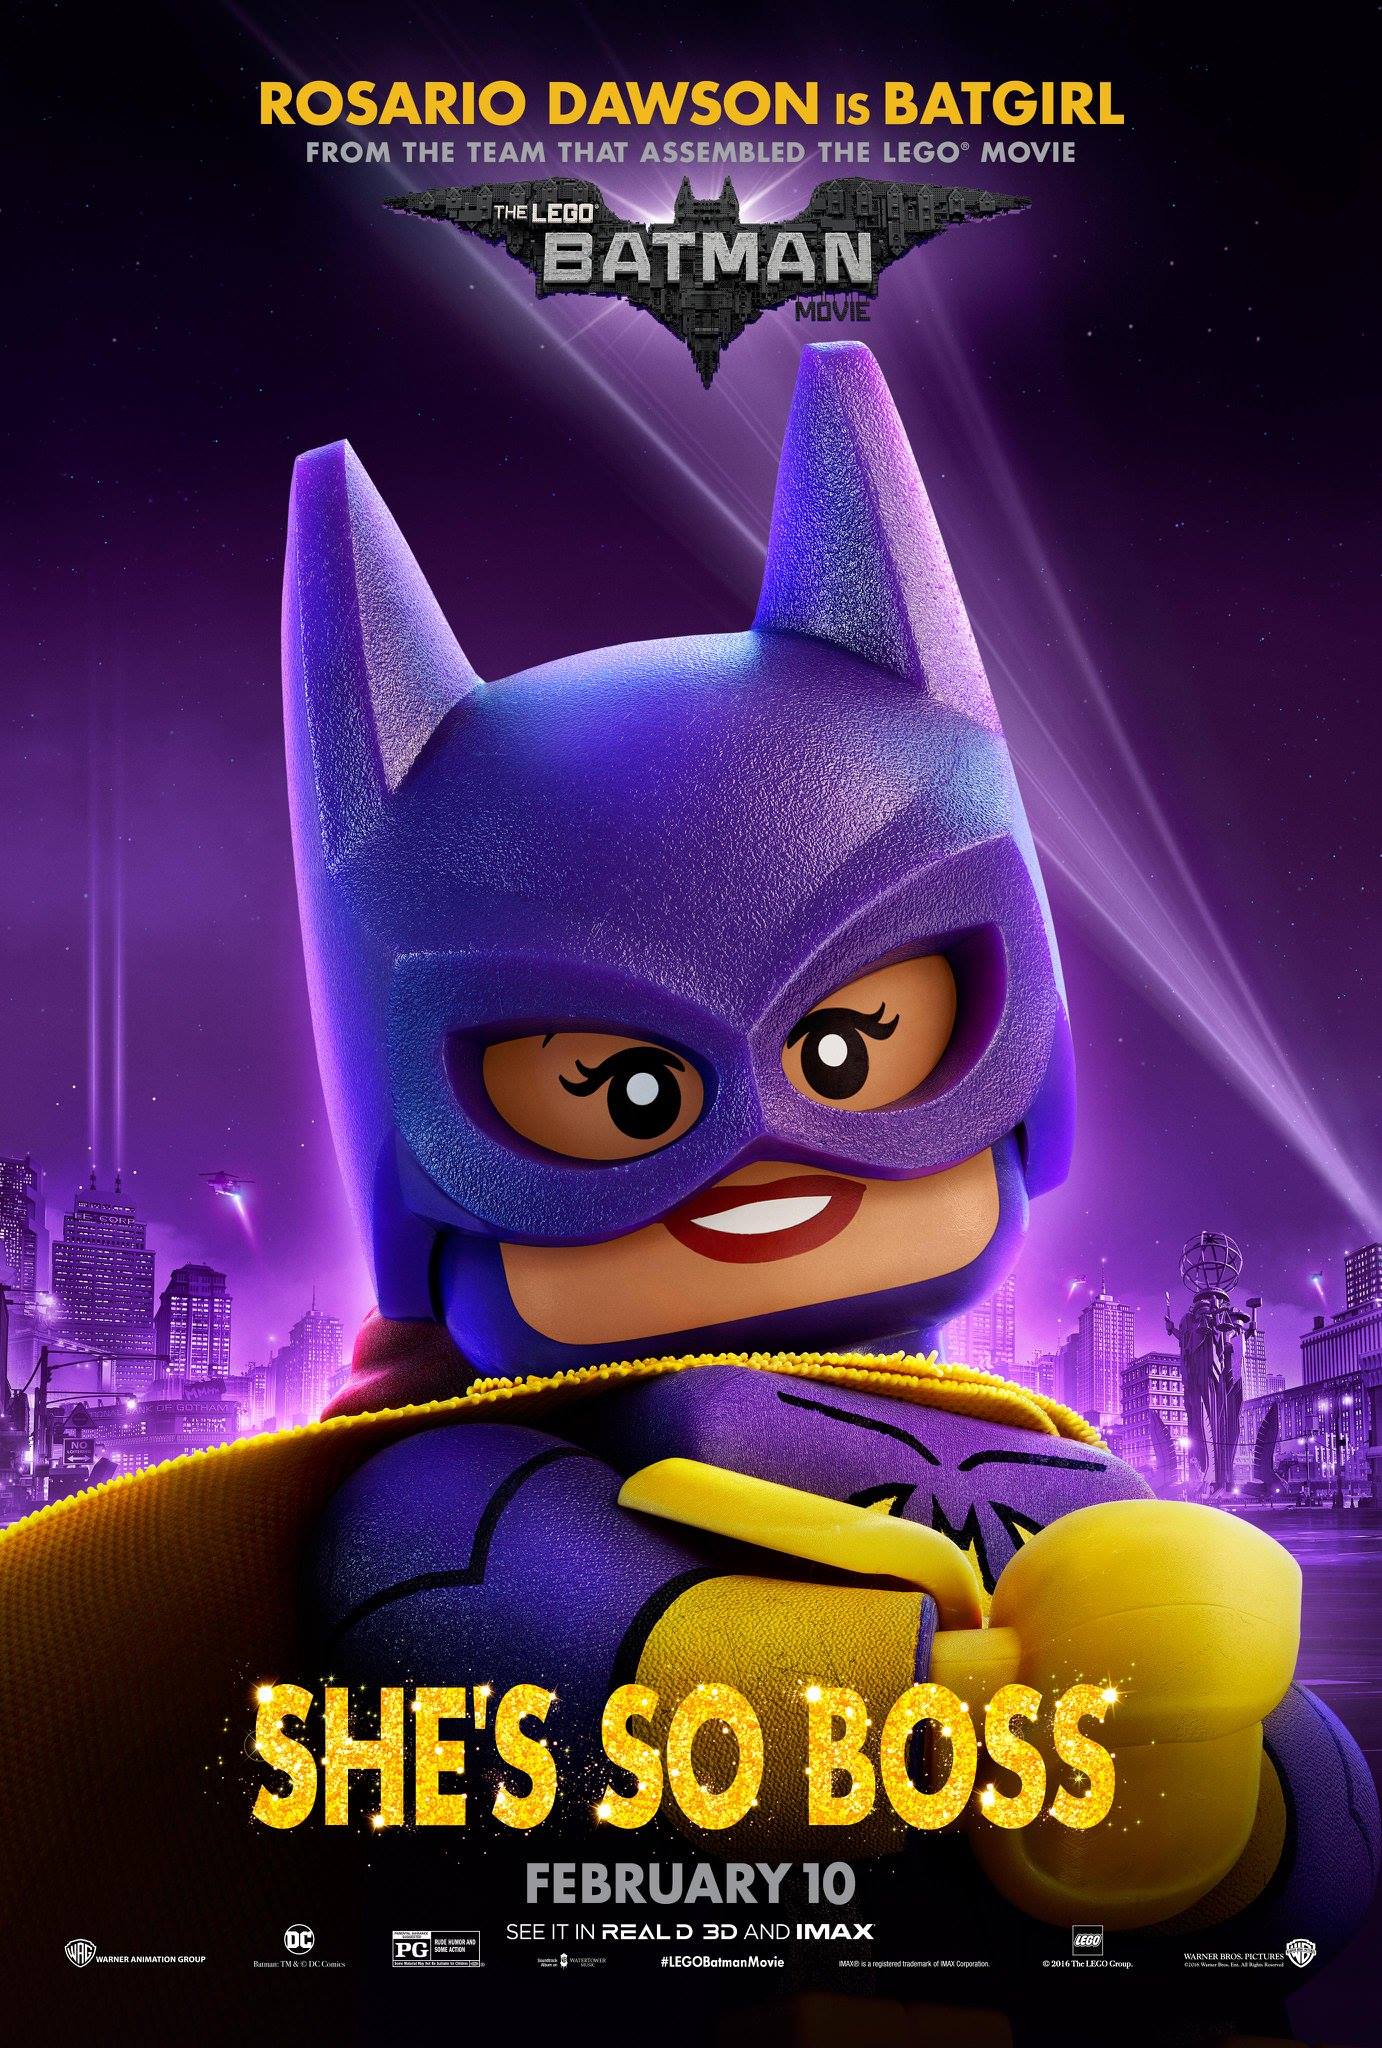 Six New Lego Batman Movie Posters Just Make It Look Better And Better